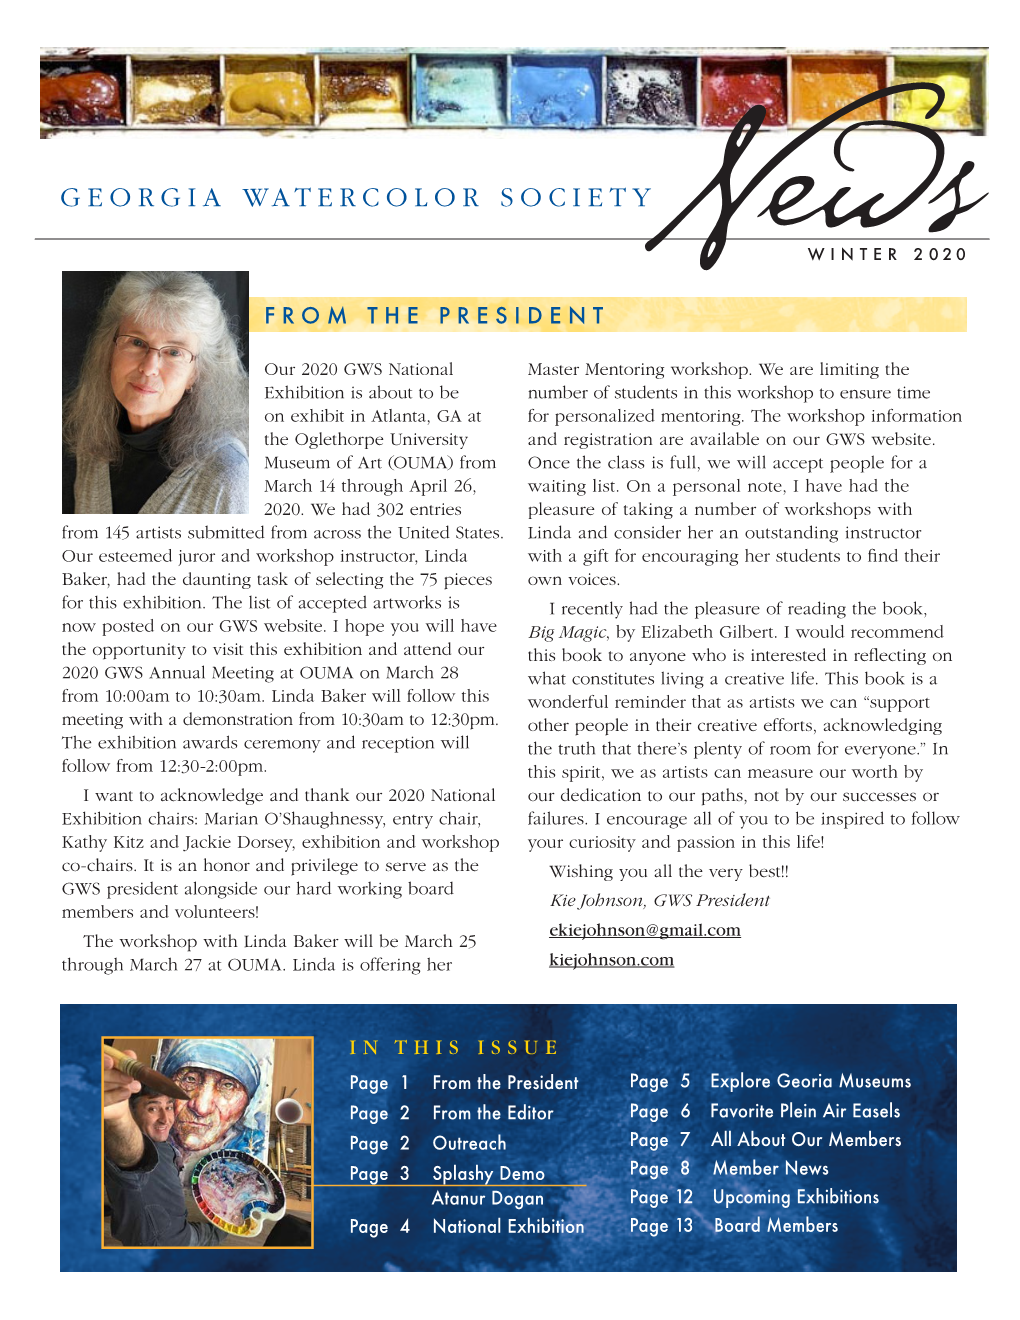 WINTER 2020 from the PRESIDENT News Our 2020 GWS National Master Mentoring Workshop